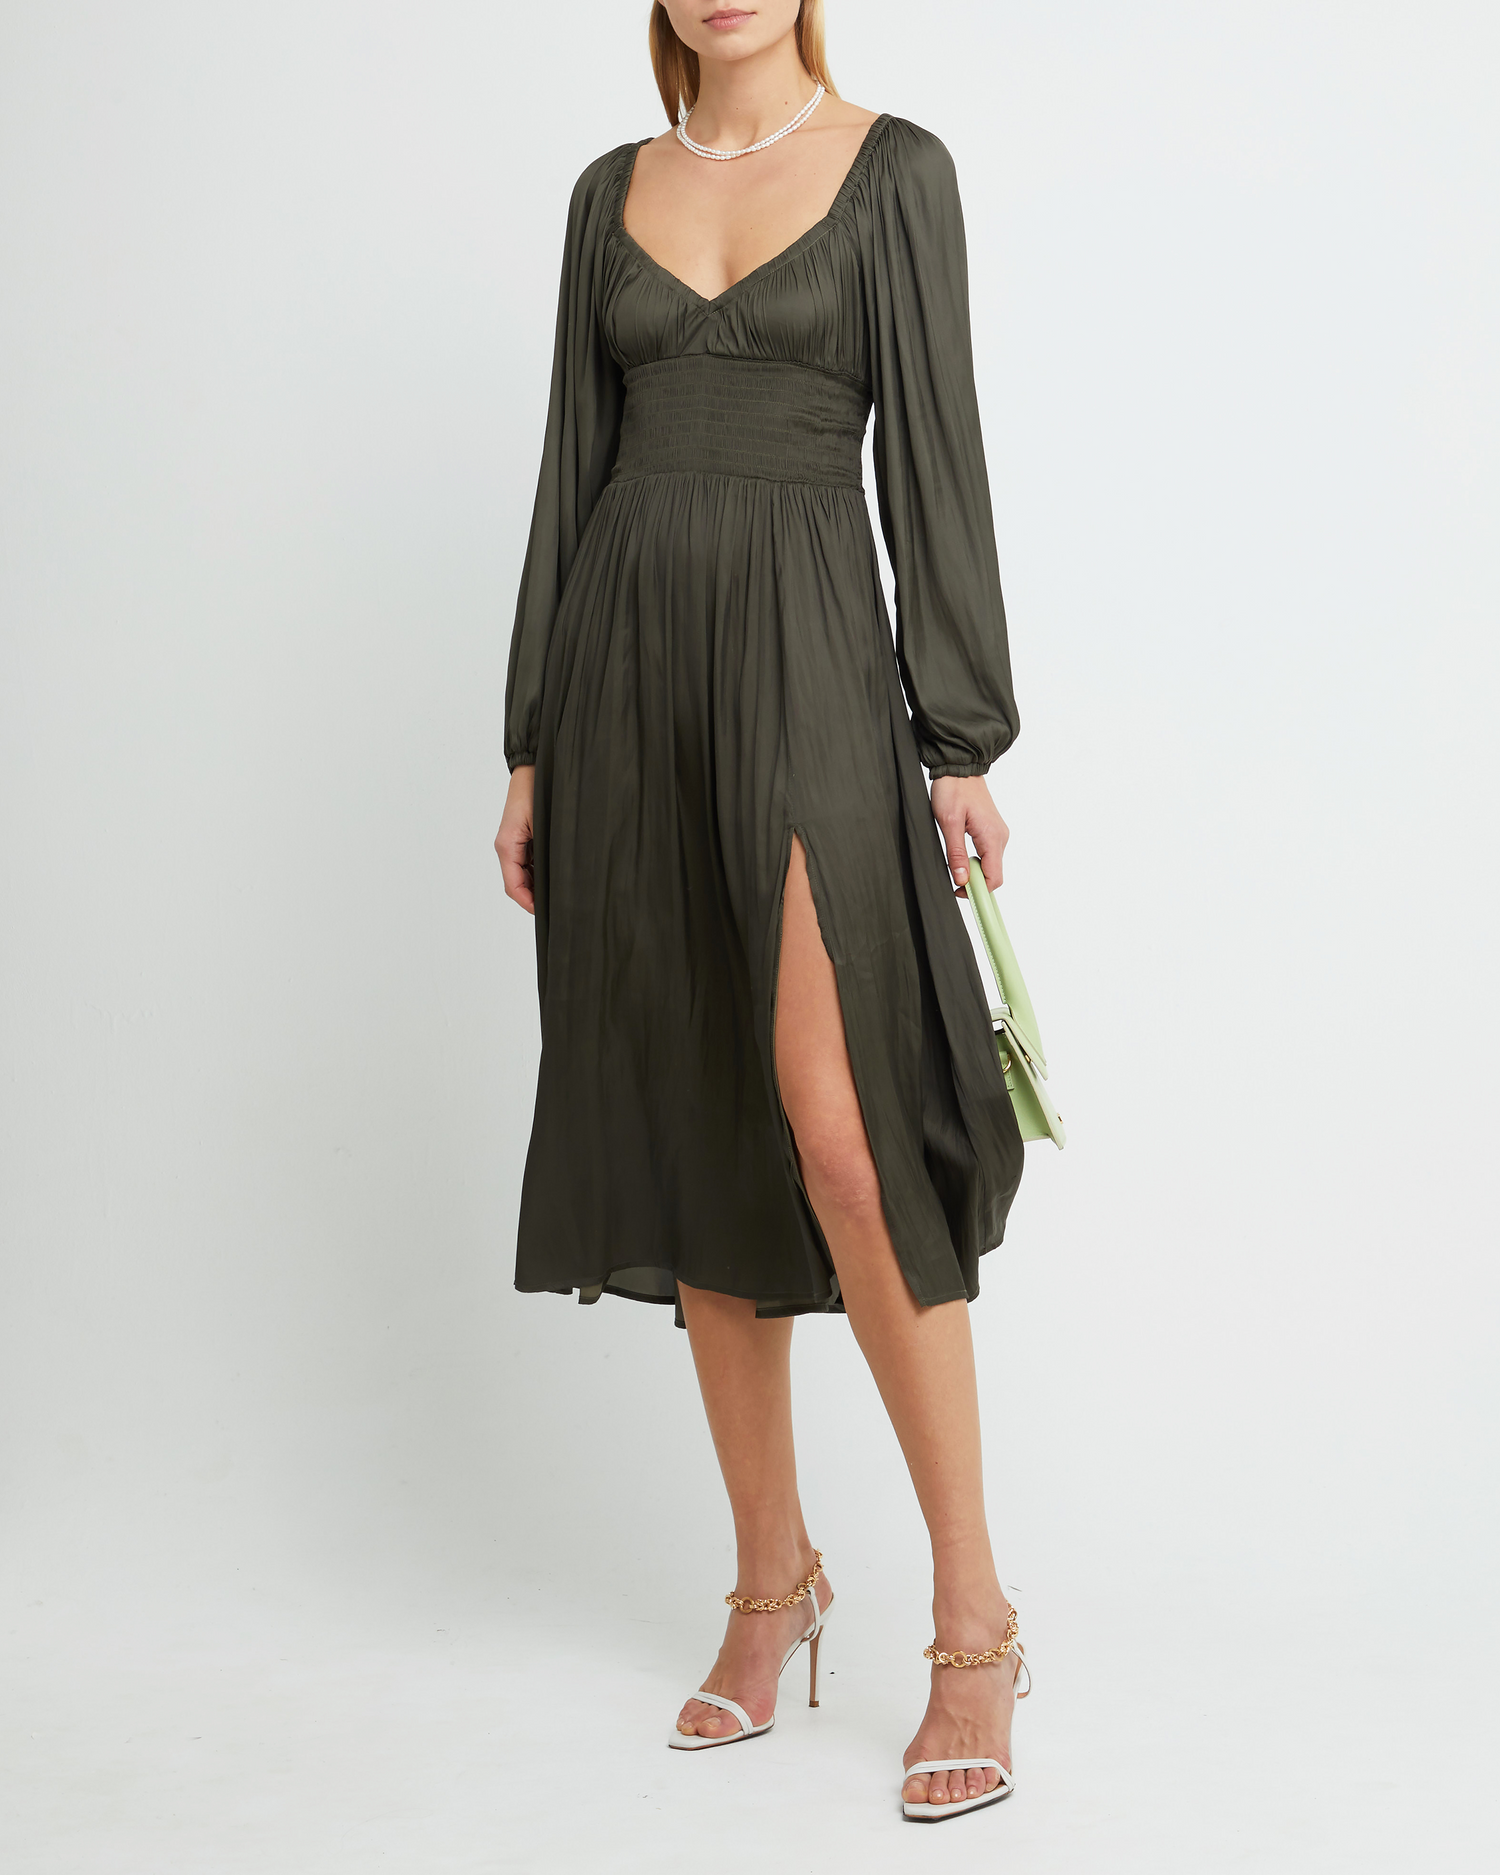 First image of Nala Dress, a green midi dress, silky, smooth, thin, pleated, smocked, V-neck, side slit